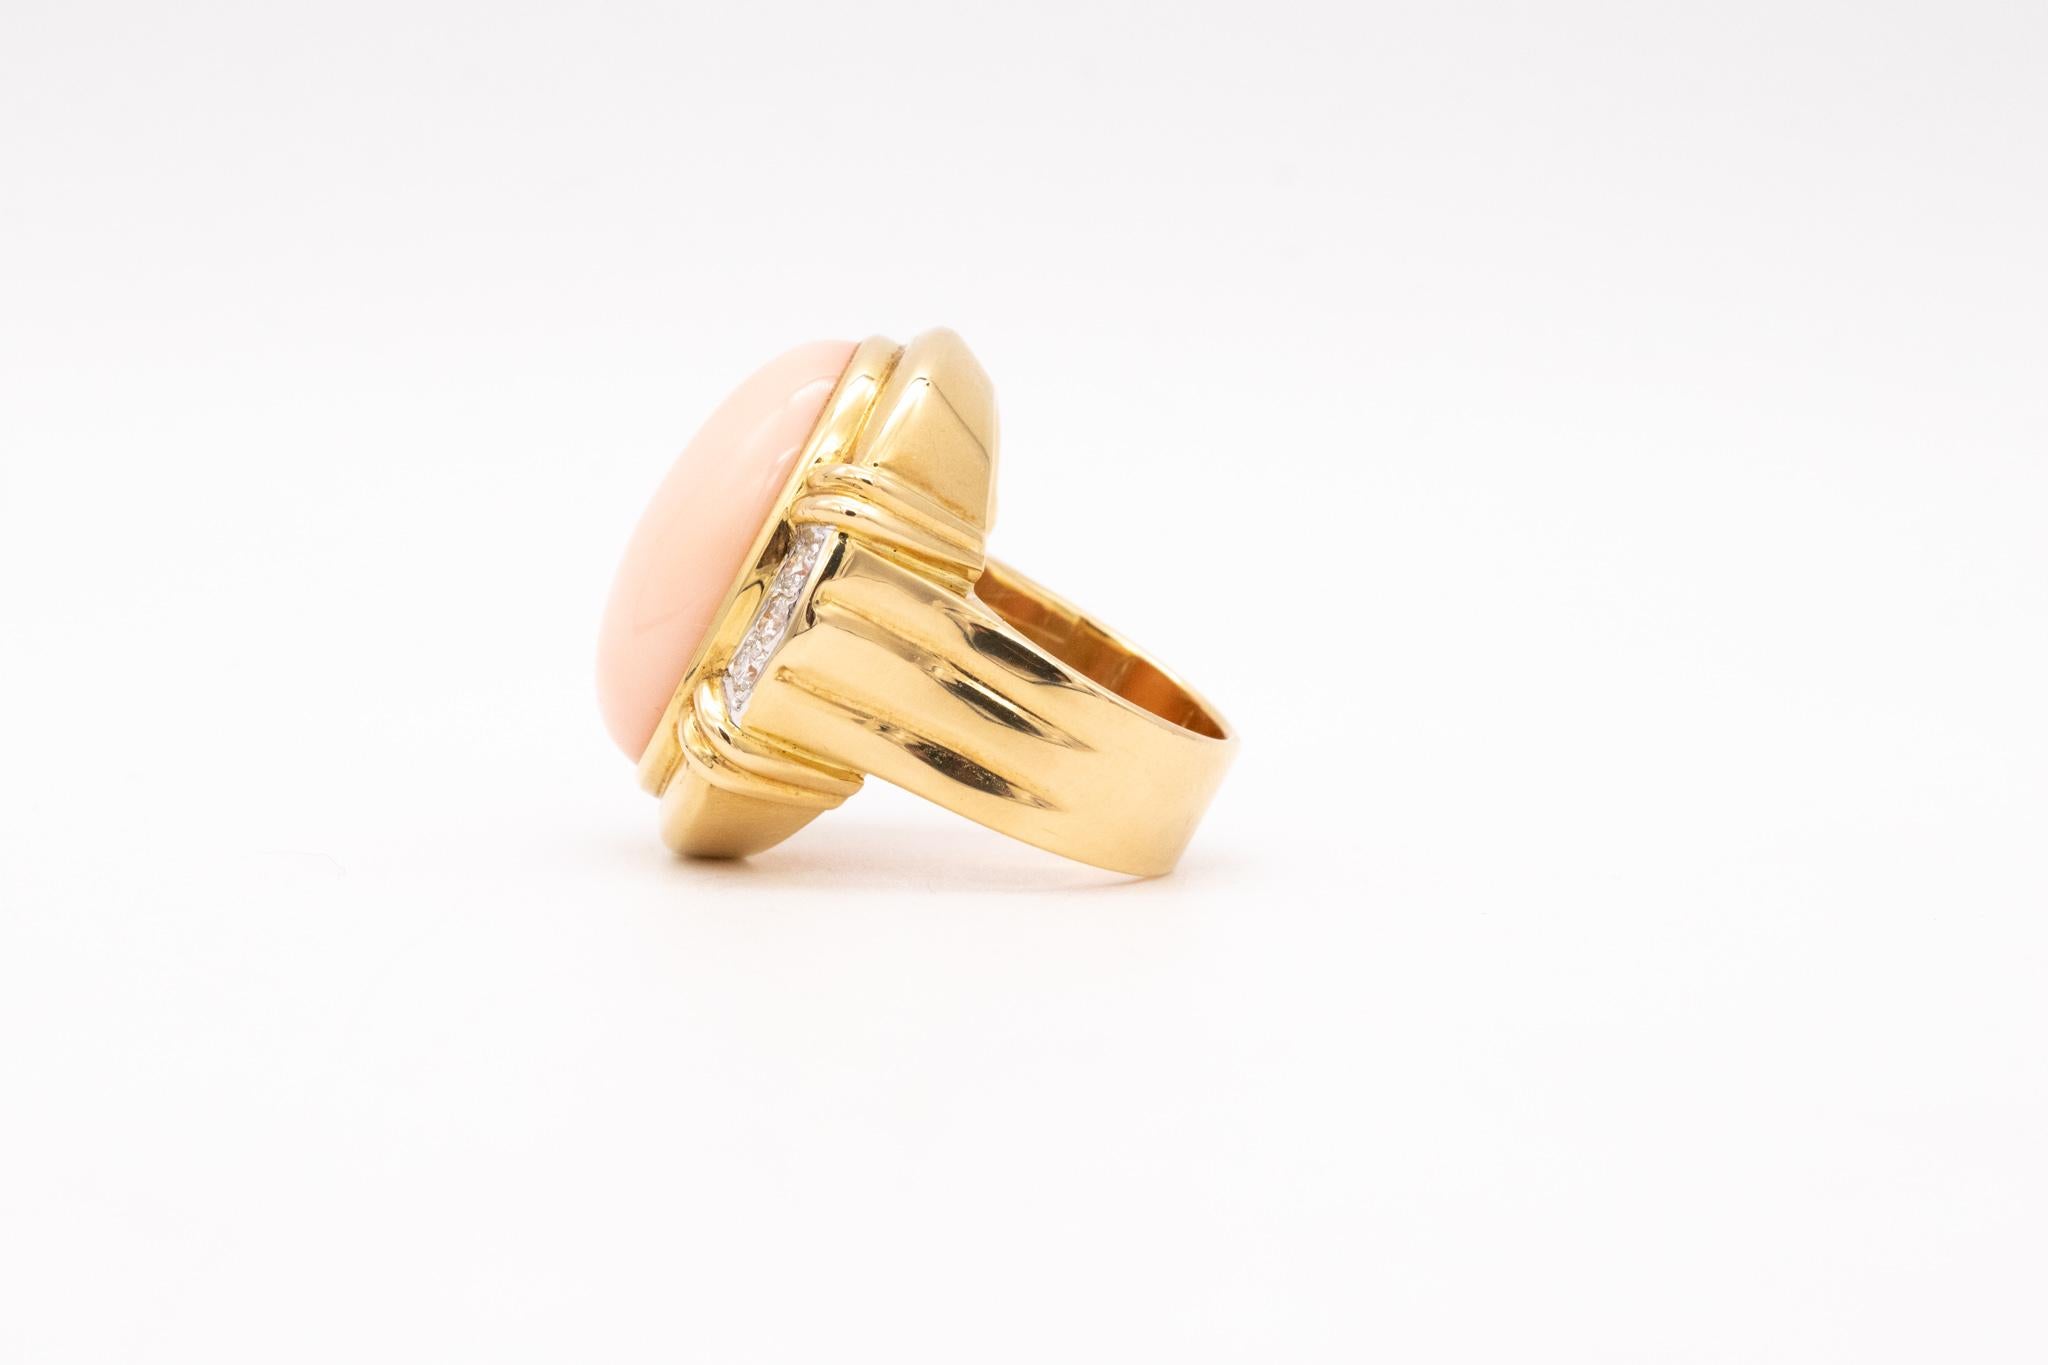 Italian Modern Cocktail Ring in 18kt Gold with 25.54 Cts Diamonds and Pink Coral In Excellent Condition For Sale In Miami, FL